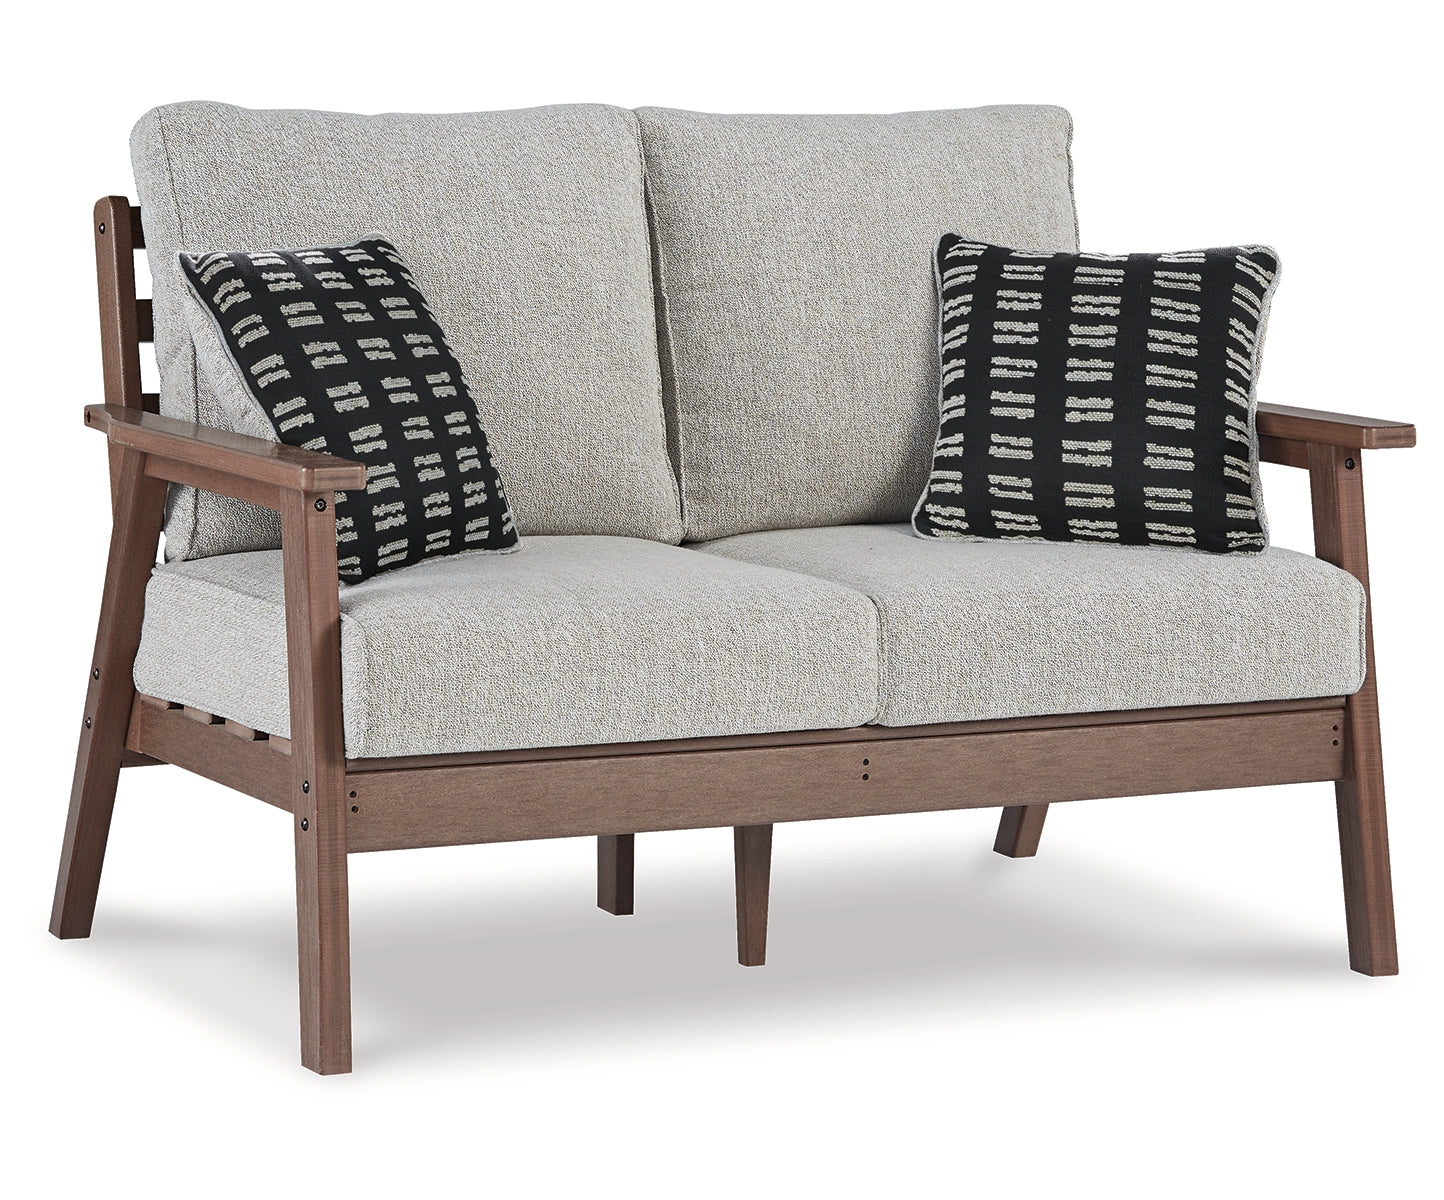 Emmeline Outdoor Sofa and Loveseat with Coffee Table and 2 End Tables